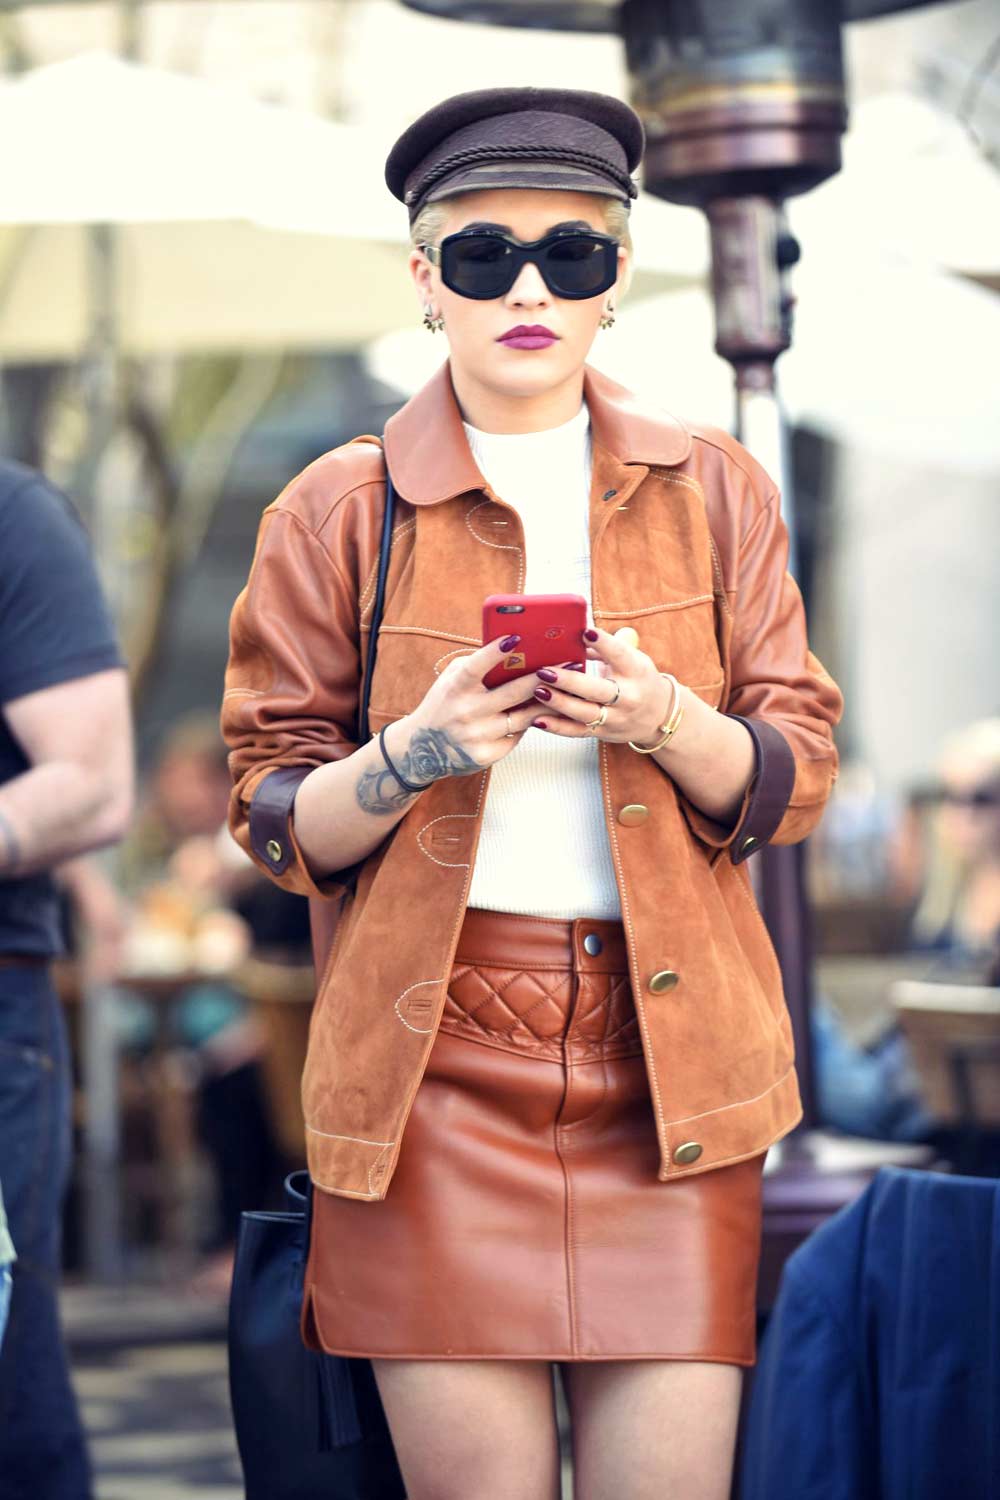 Rita Ora out and about in LA